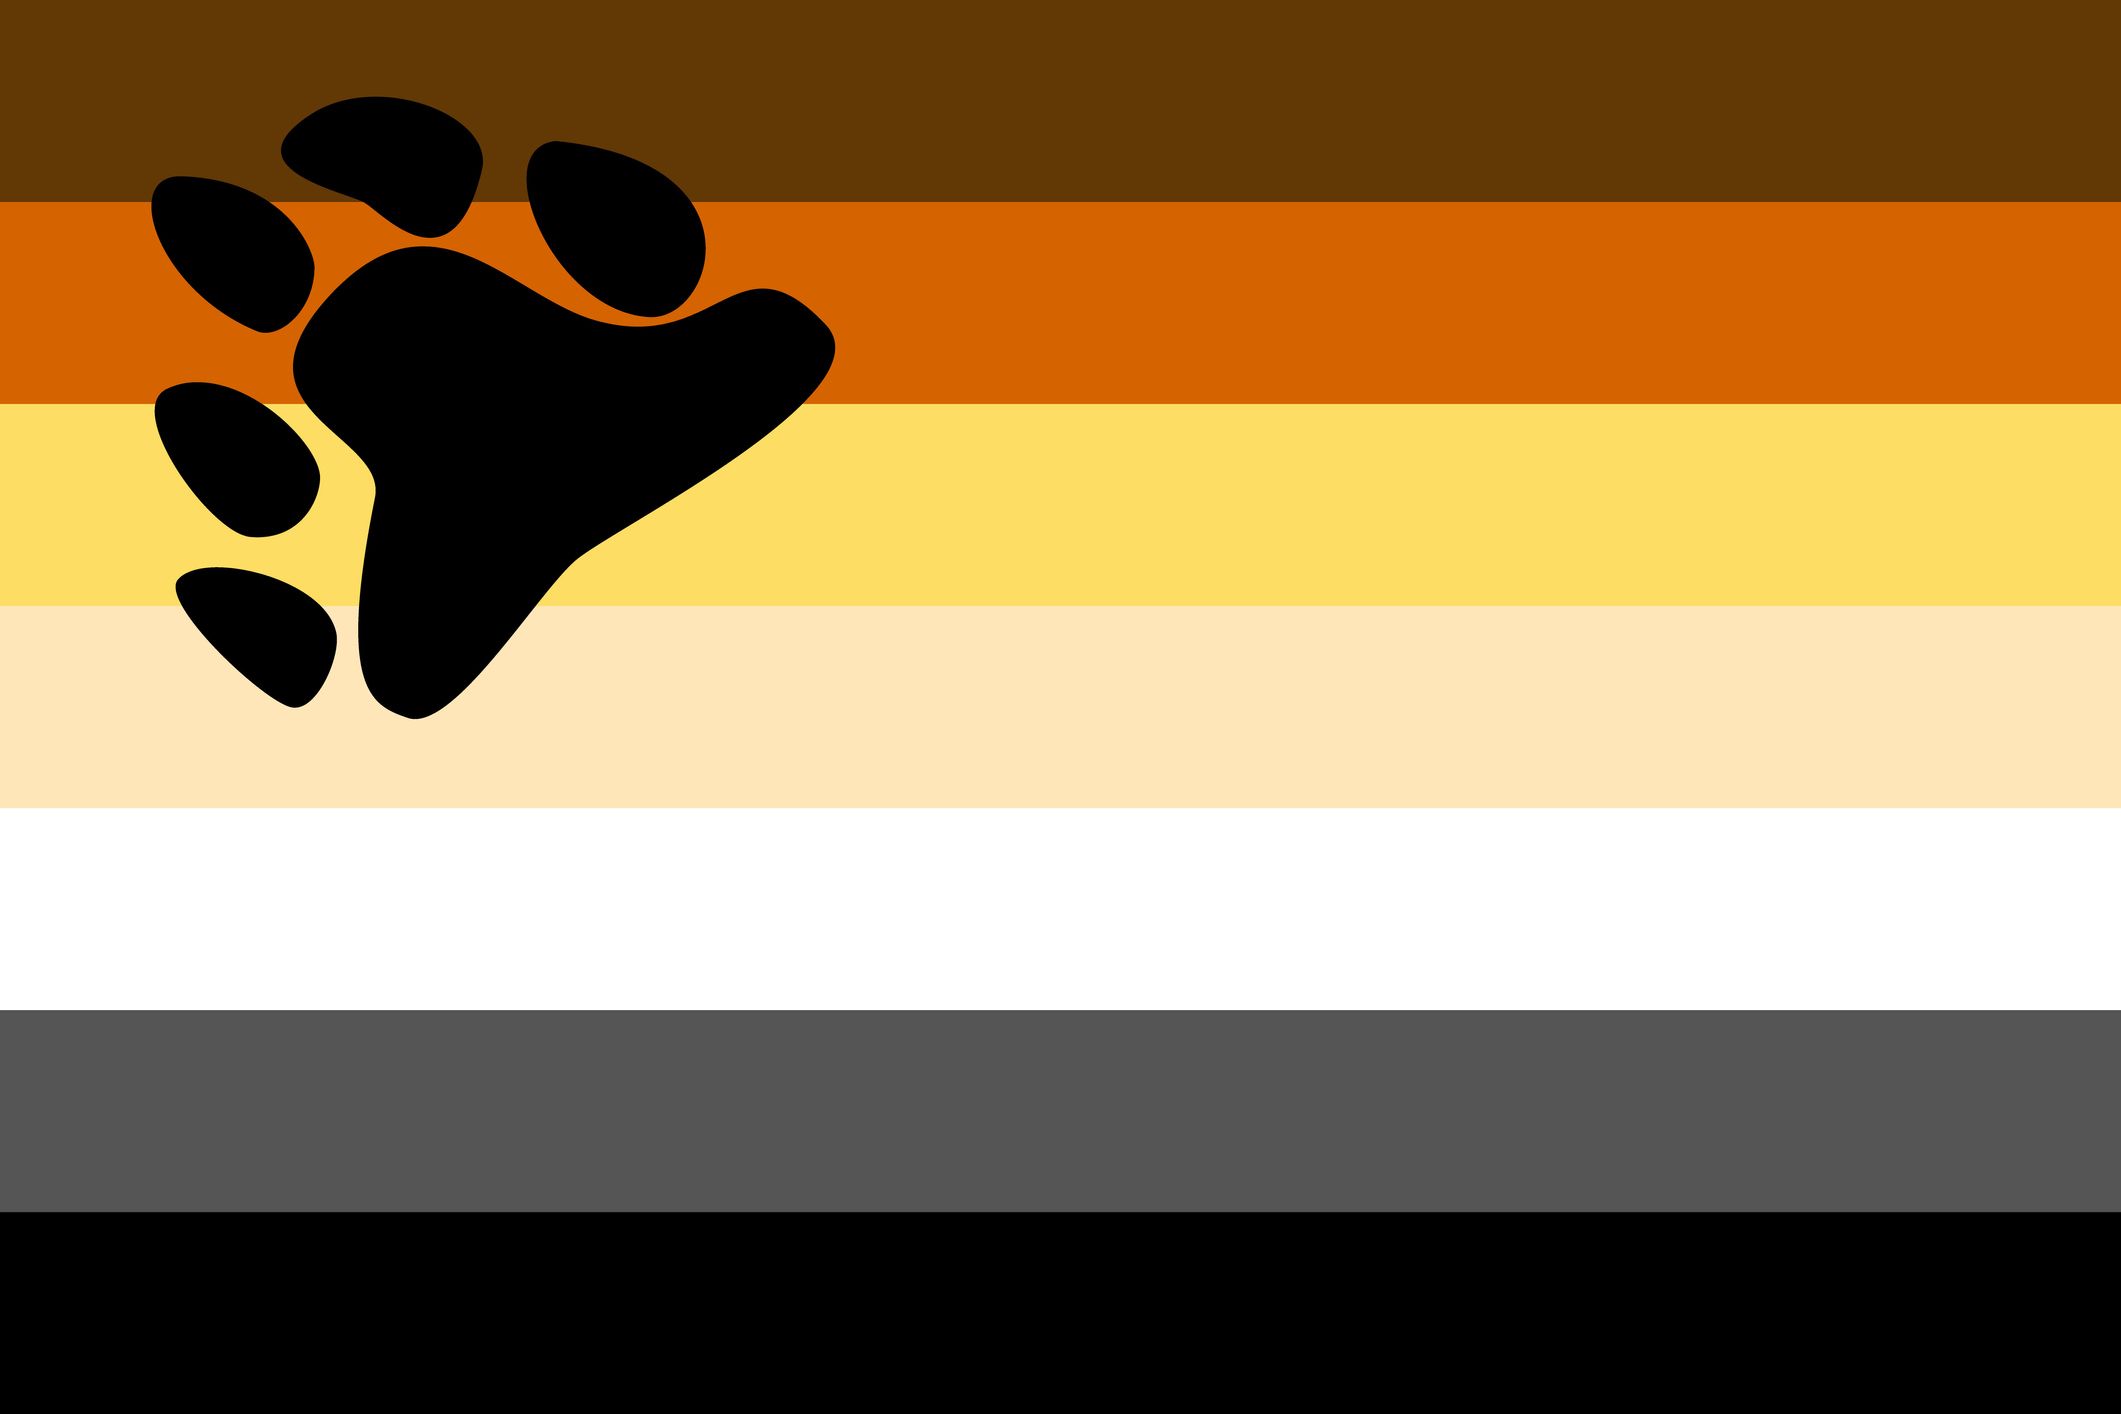 original gay pride flag and its meaning